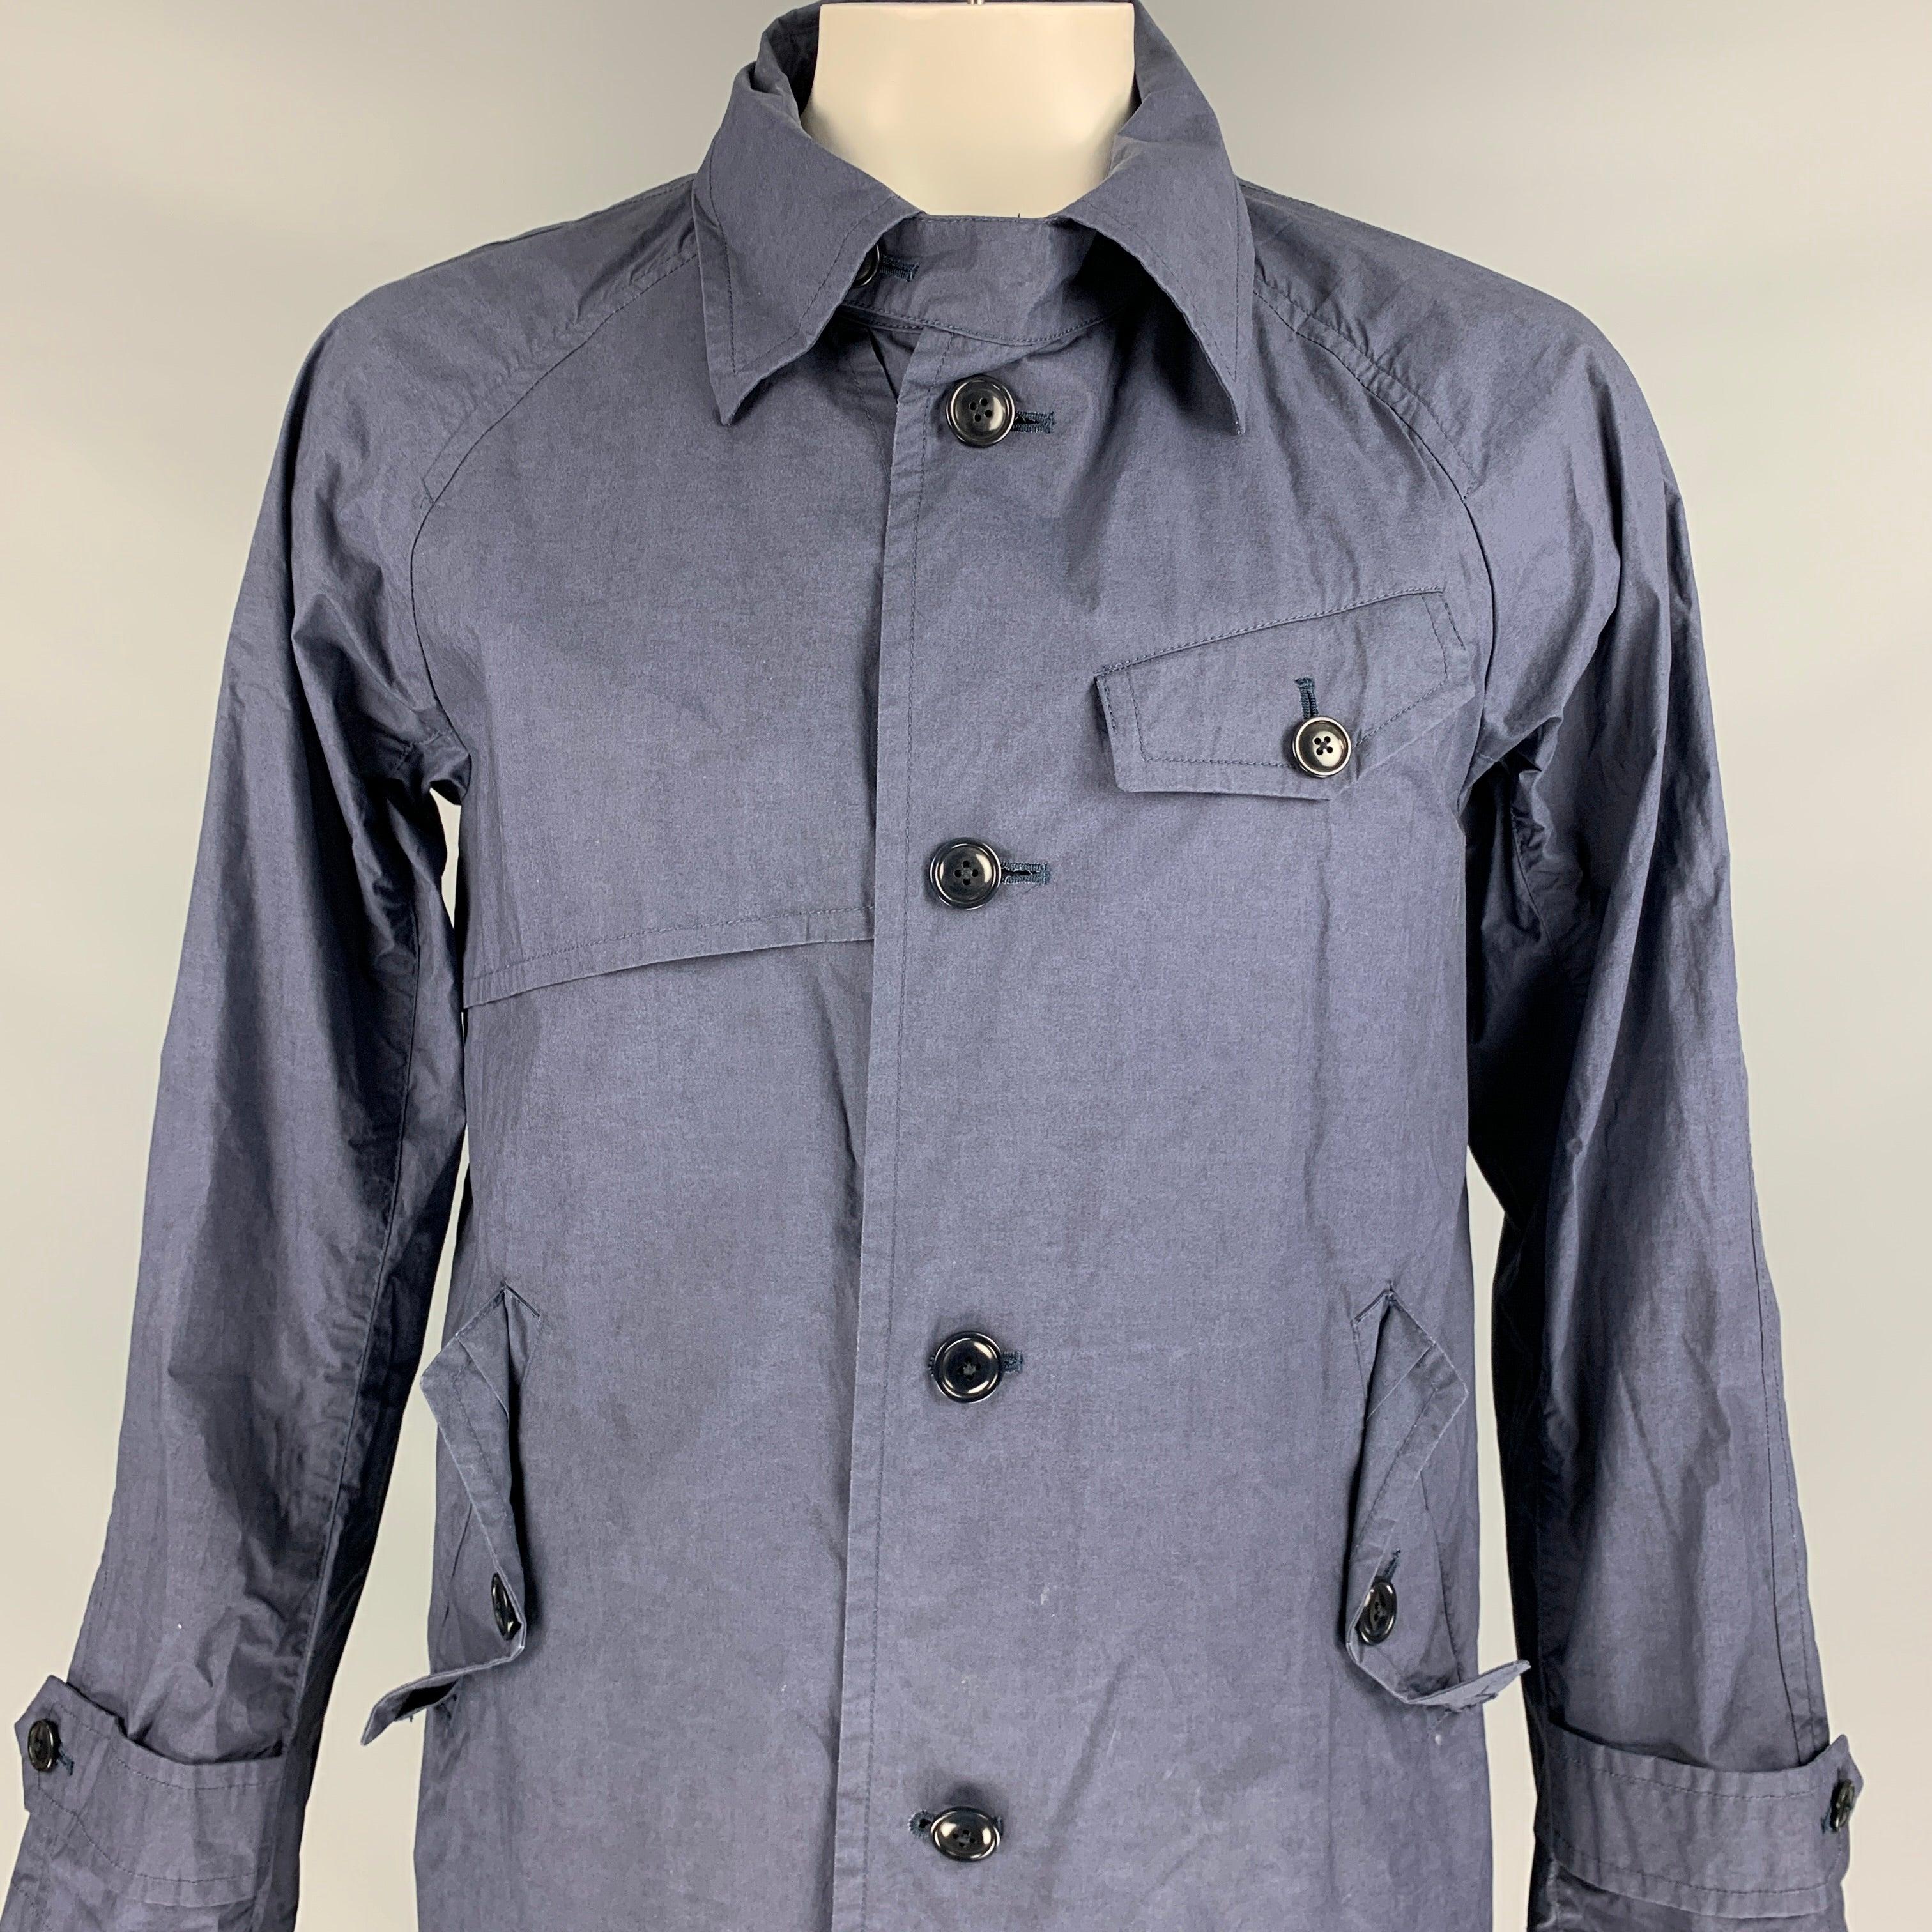 TS(S) jacket comes in a navy cotton featuring a spread collar, flap pockets, and a buttoned closure. Made in Japan.
Very Good
Pre-Owned Condition. 

Marked:   JP 4 

Measurements: 
 
Shoulder: 18 inches  Chest: 44 inches  Sleeve: 27 inches  Length: